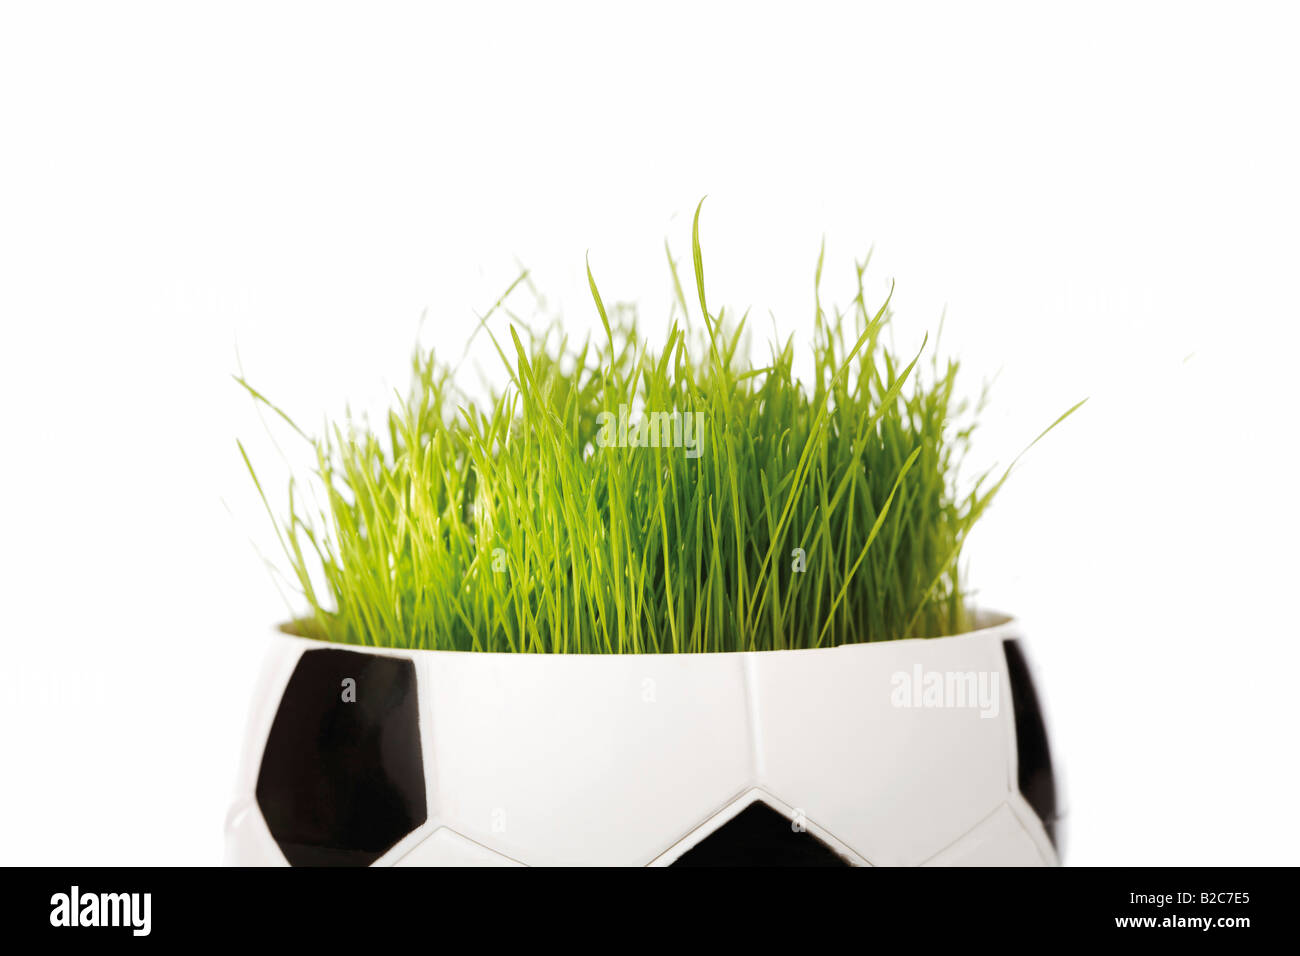 Half a football with original football pitch grass from the World Cup Stock Photo